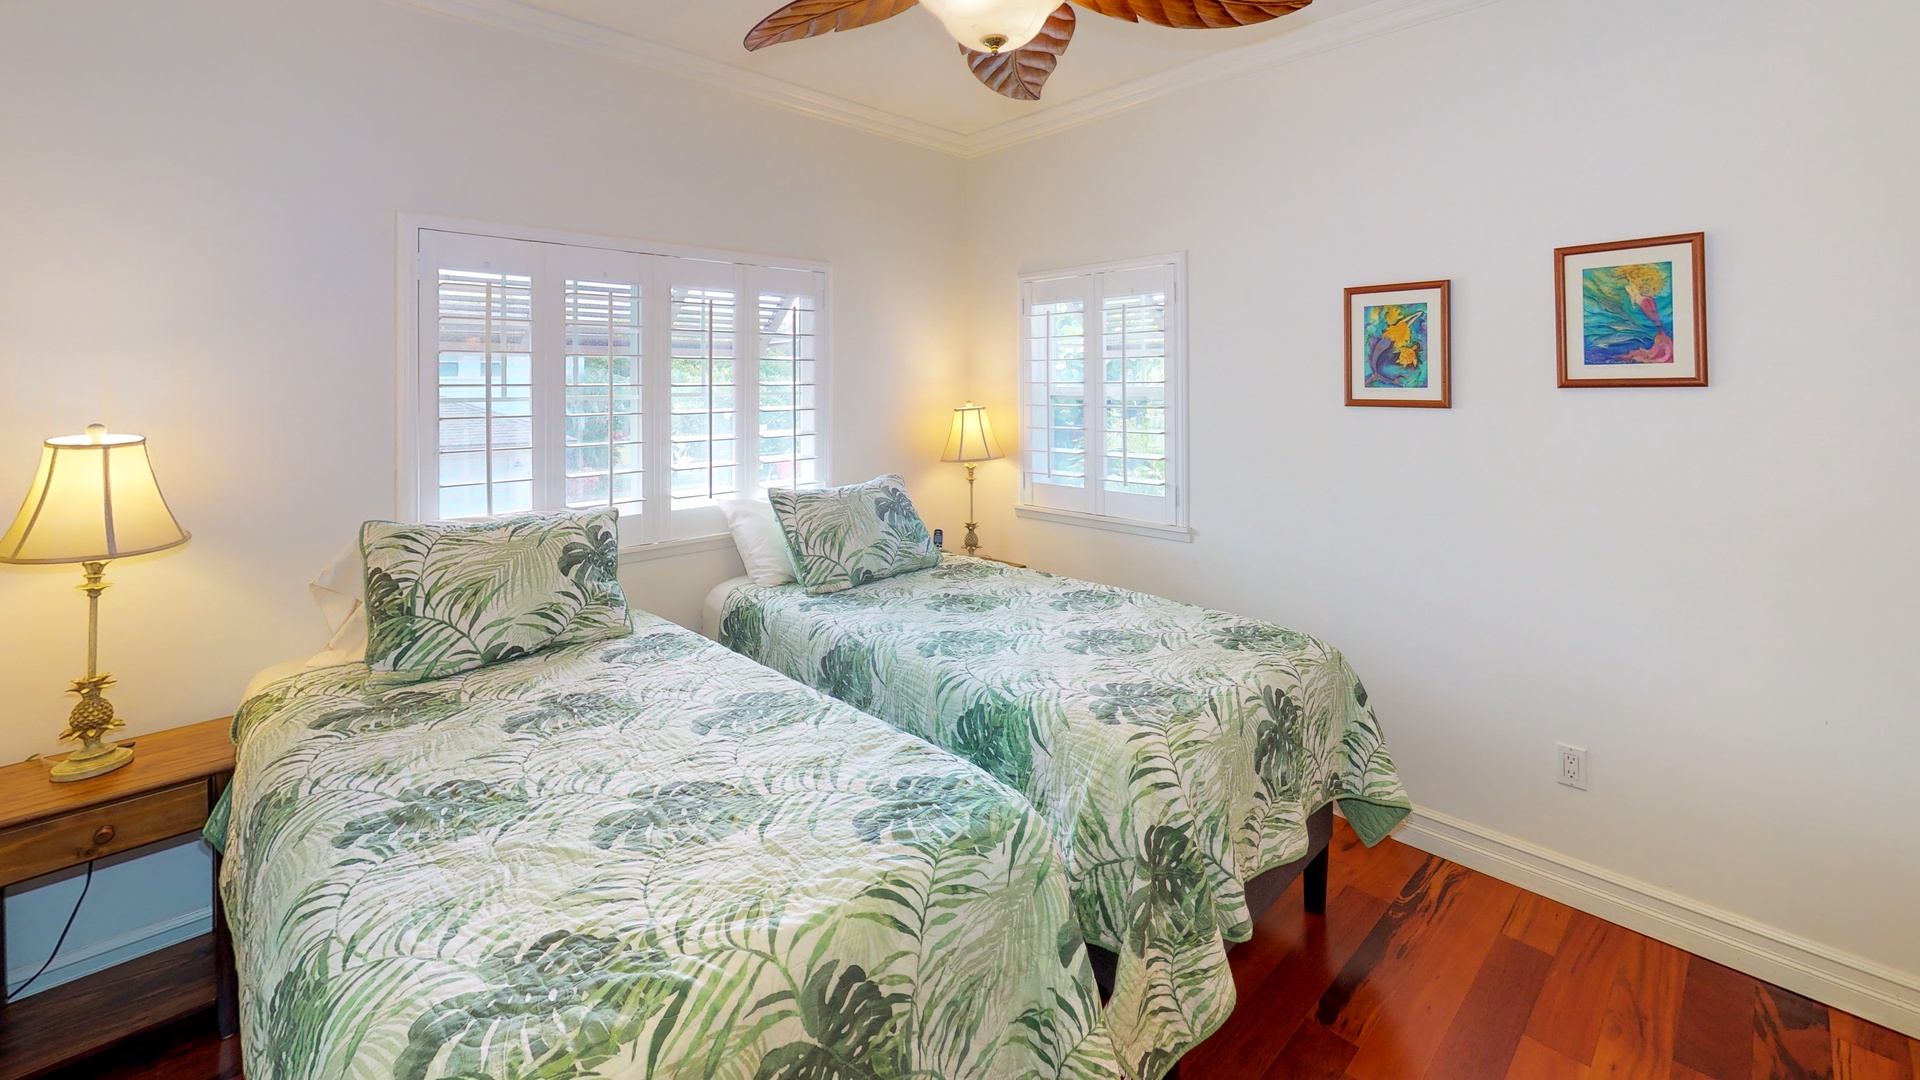 Kapolei Vacation Rentals, Coconut Plantation 1200-4 - Plenty of natural lighting in the guest bedroom.